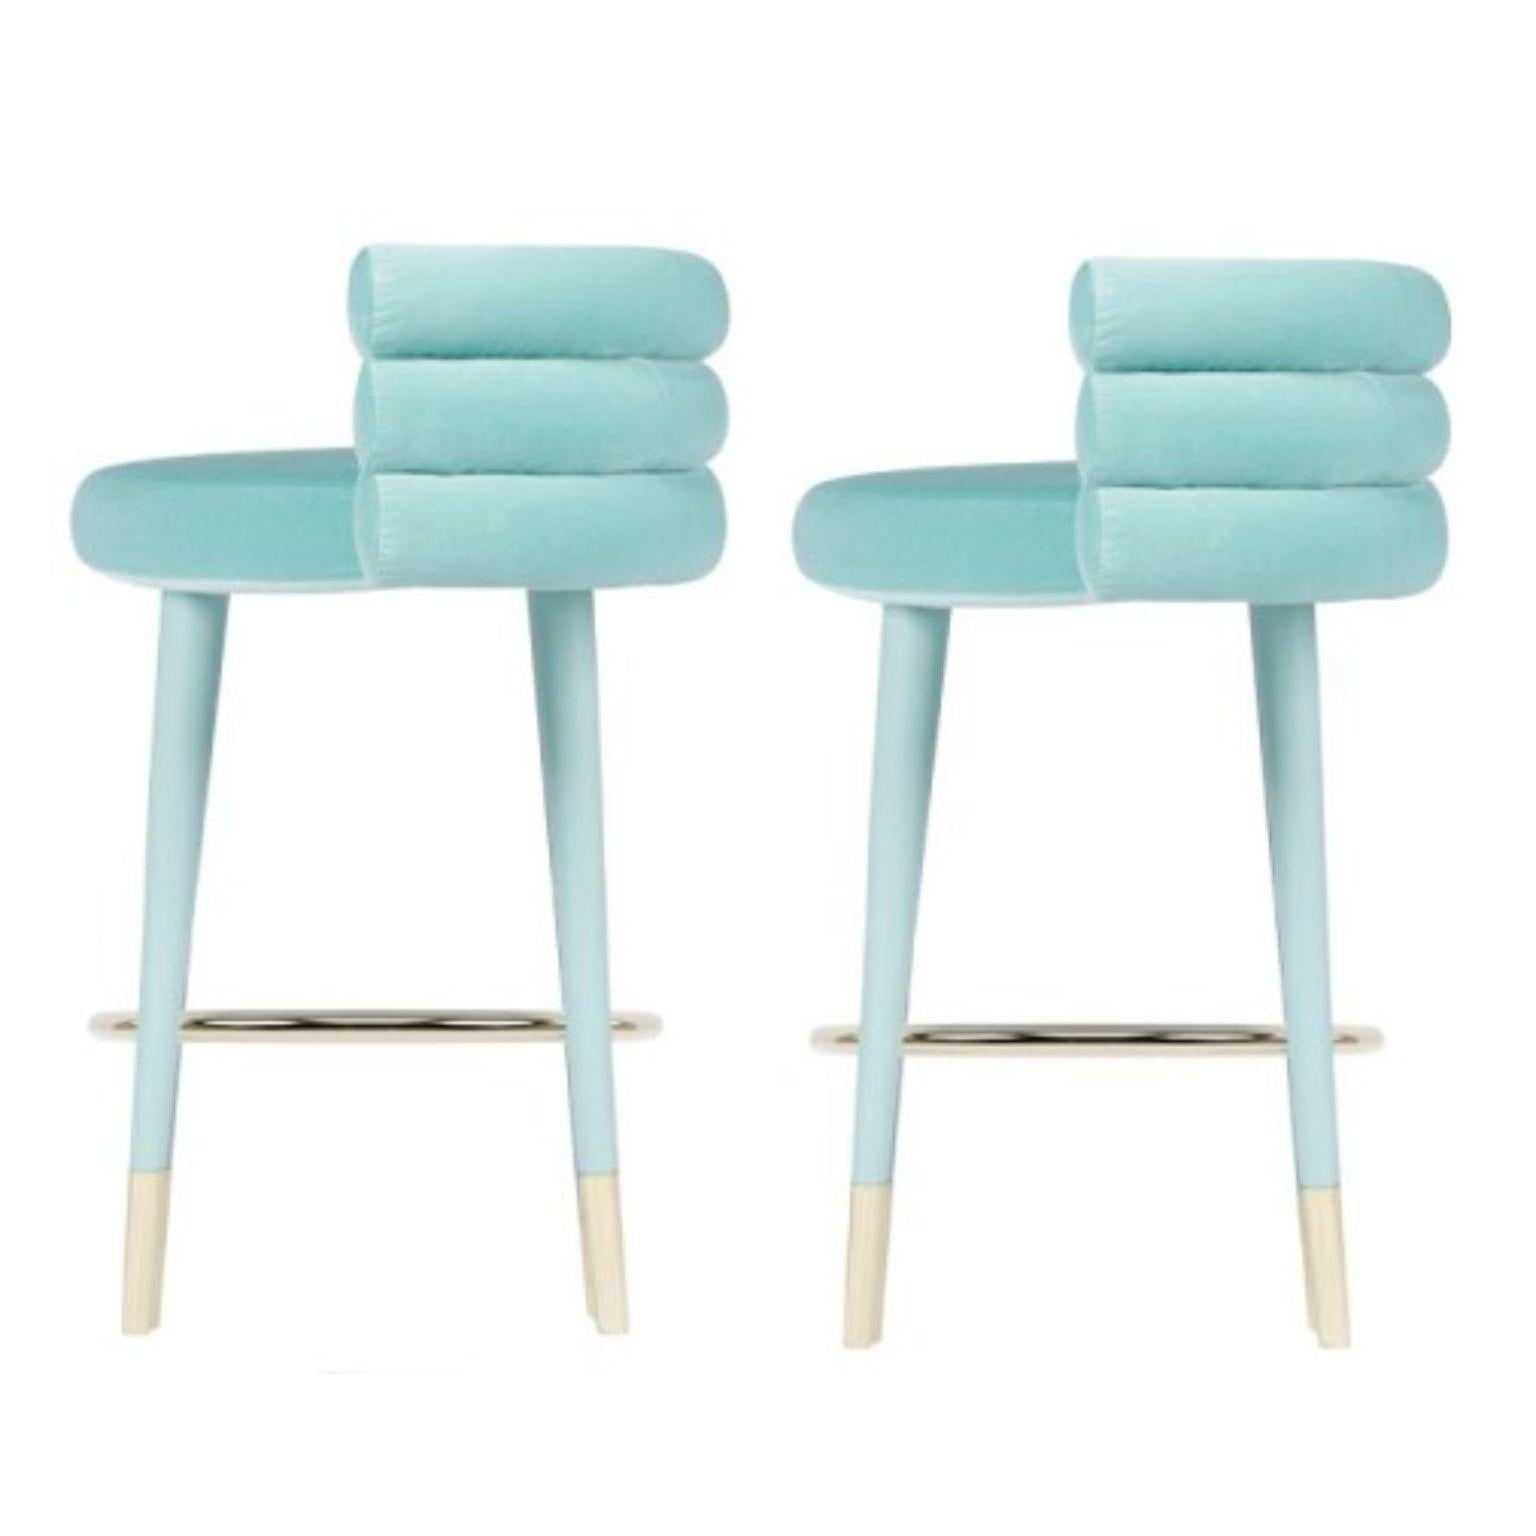 Set of 2 marshmallow bar stools, Royal Stranger
Dimensions: 100 x 70 x 60 cm.
Materials: Velvet upholstery, brass.
Available in: Mint green, light pink, Royal green, Royal red.

Royal stranger is an exclusive furniture brand determined to bring